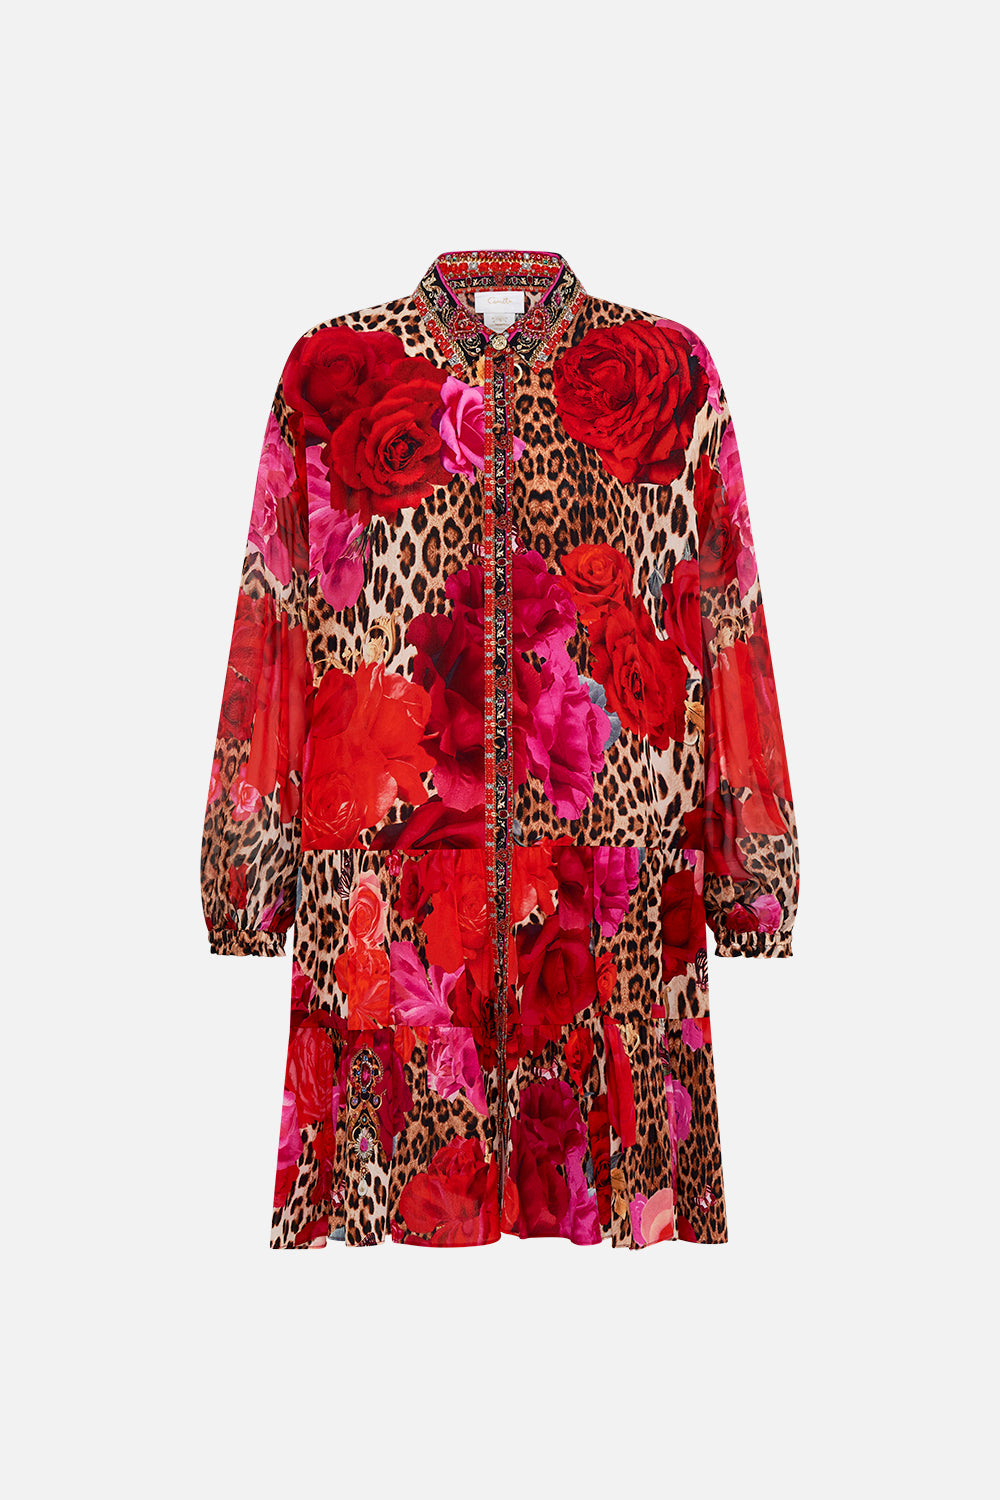 Product view of CAMILLA floral shirt dress in Heart Like A Wildflower print